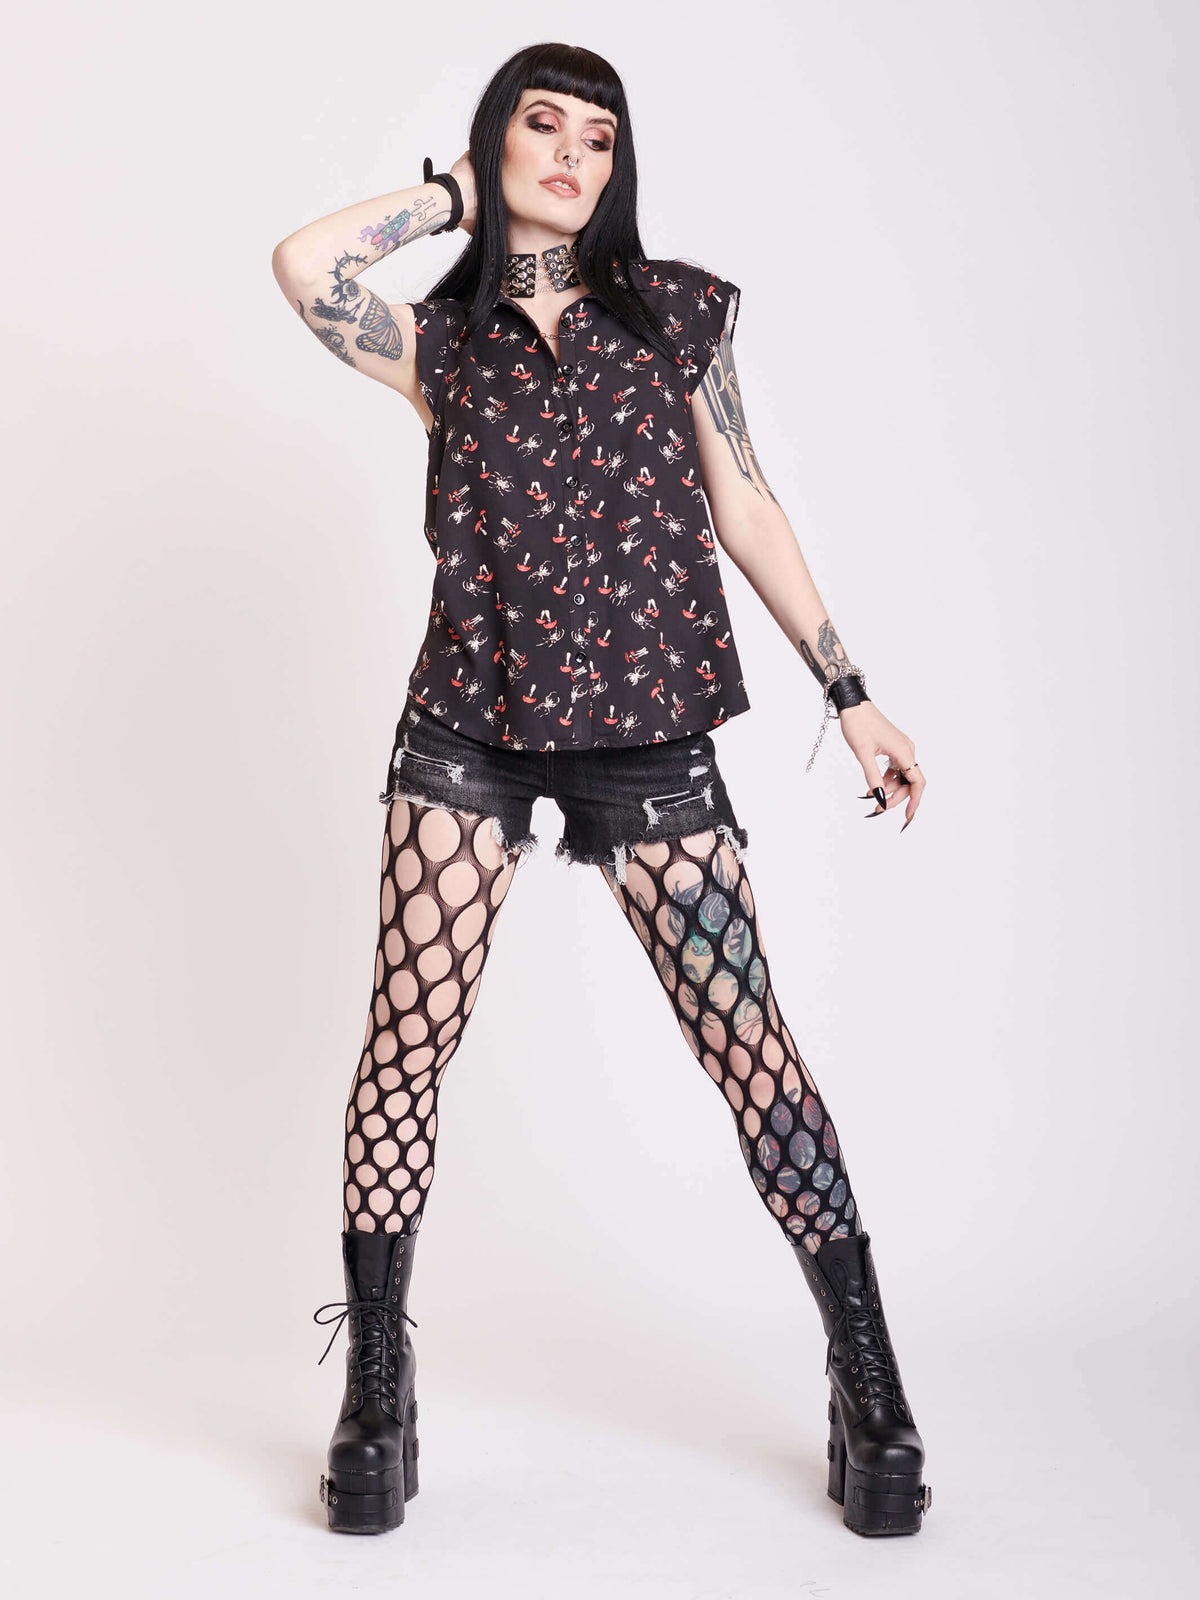 black sleevless button up top with scorpian and mushroom print